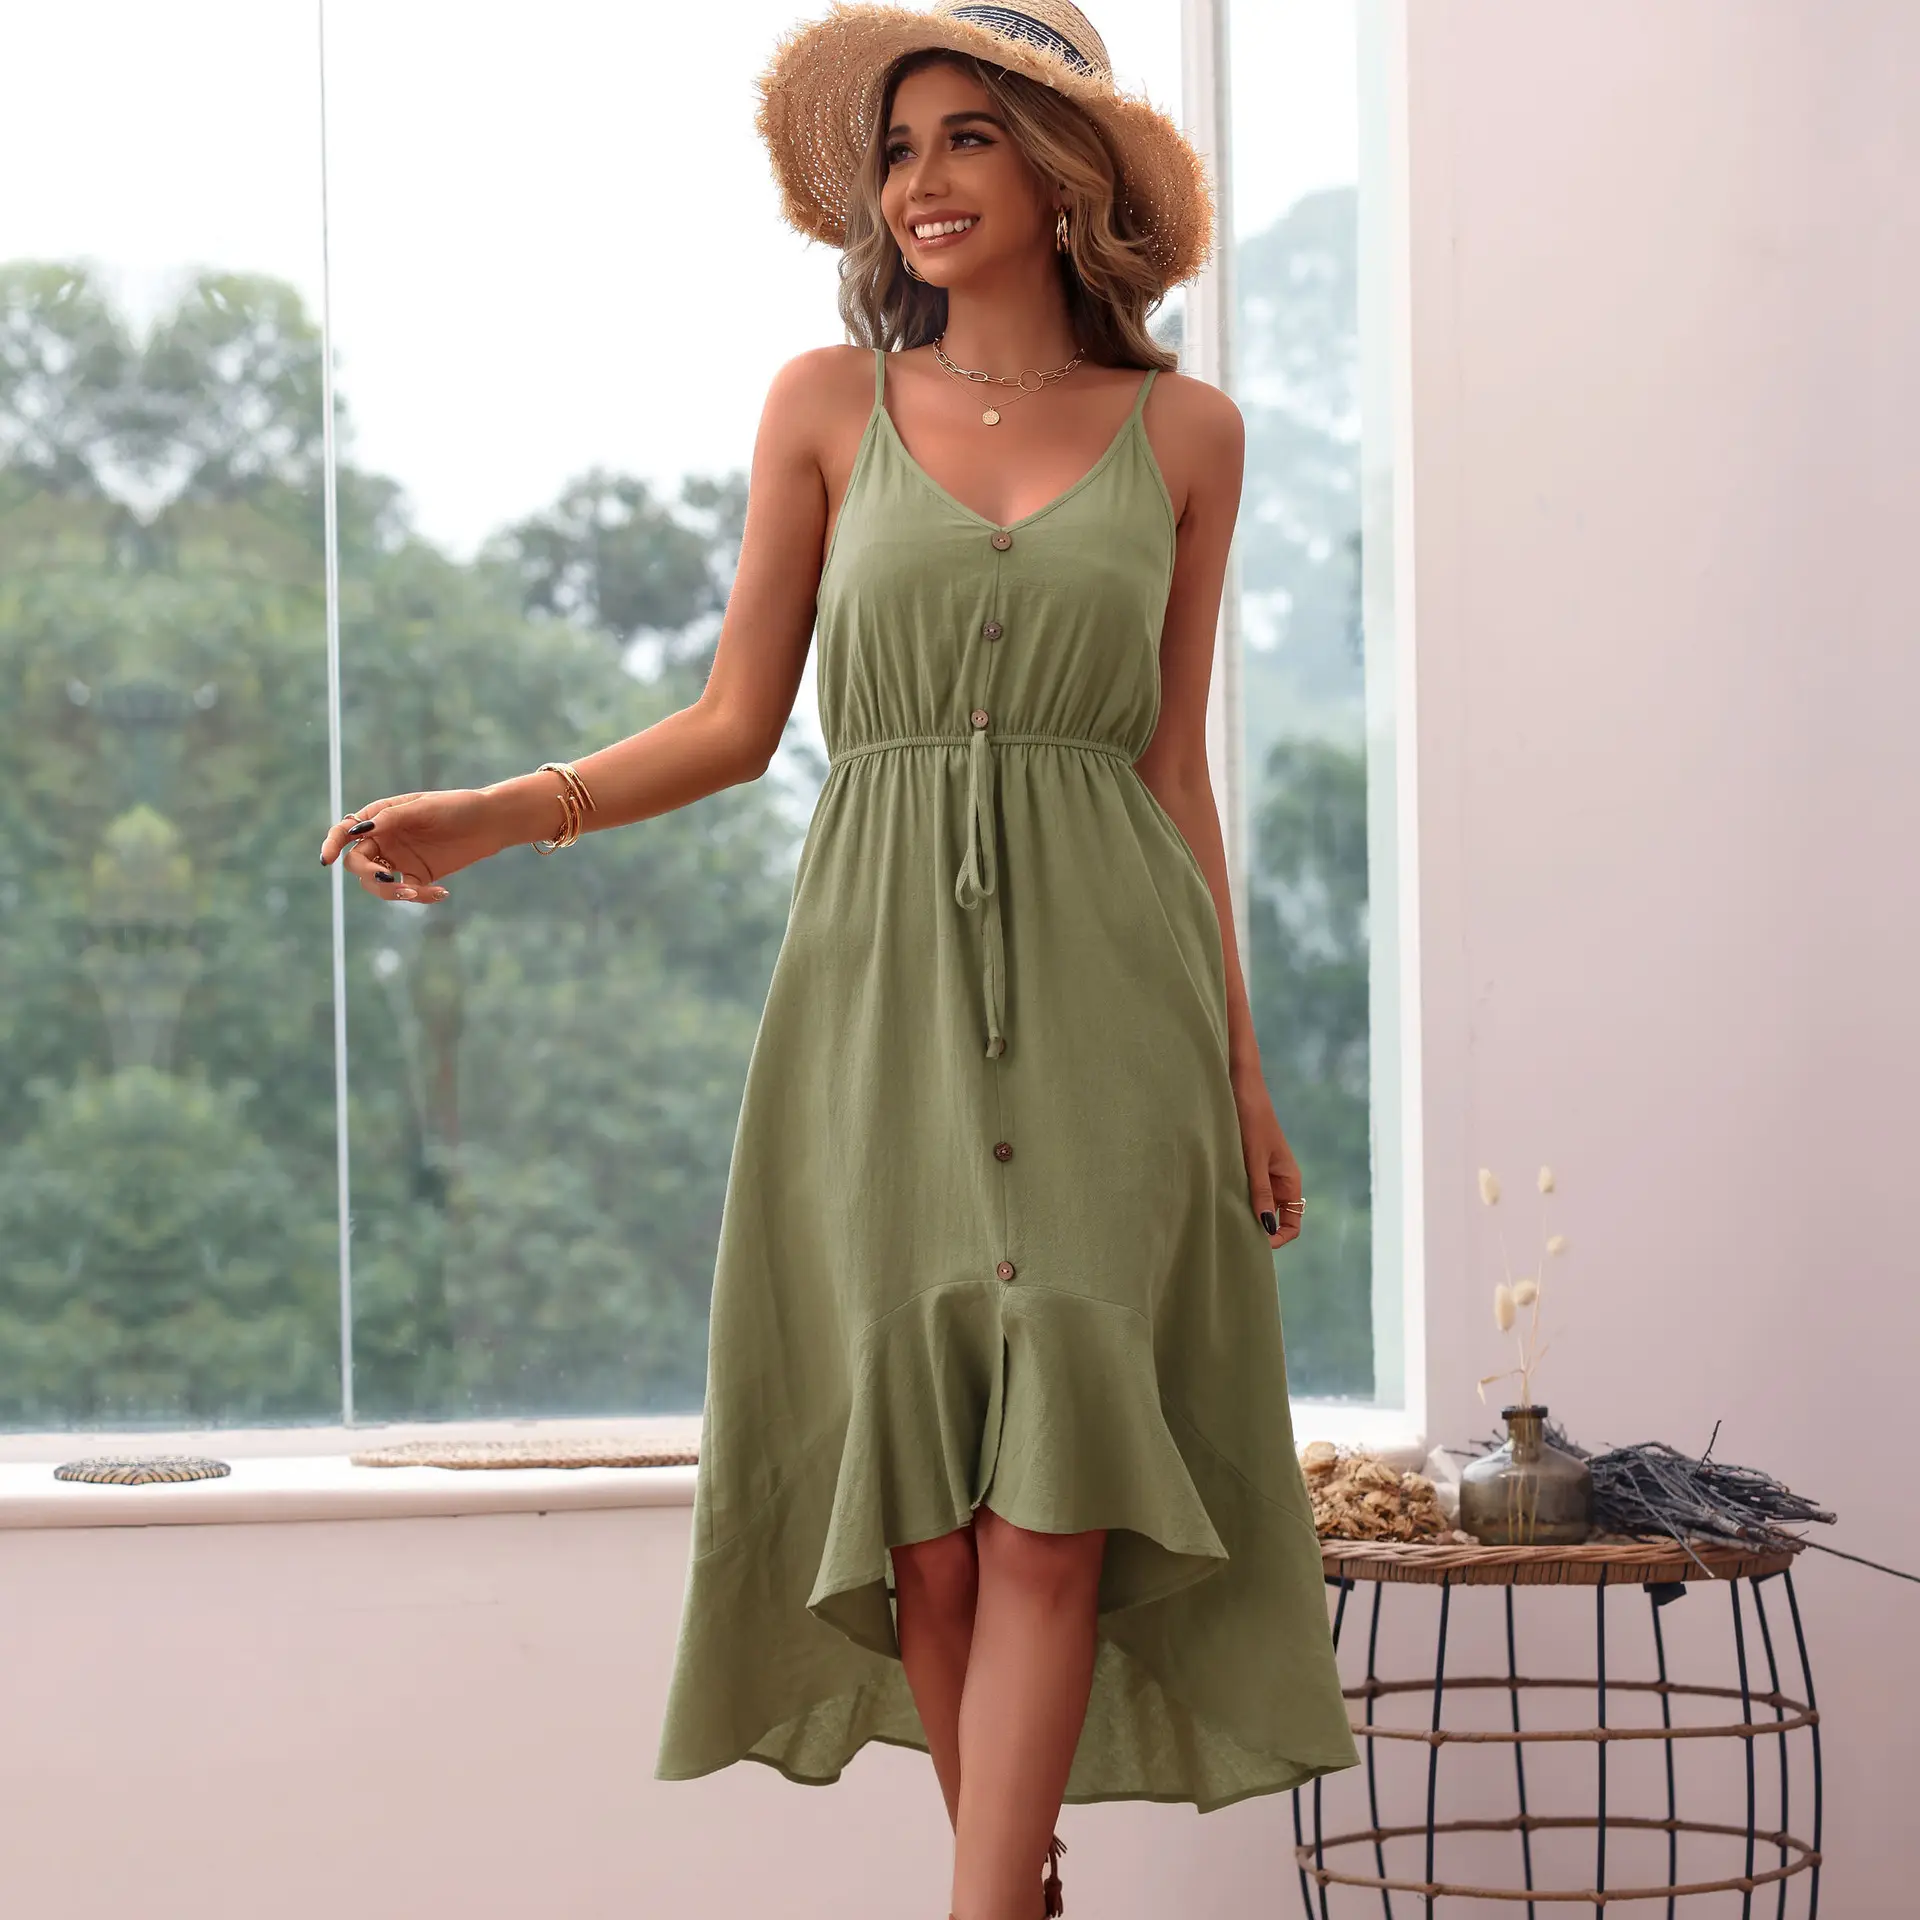 Boho Style New Design Elbise Women Flounce Girl Dress Solid Ruffle Contrast Lace Sleeveless Rayon Summer Casual Dress